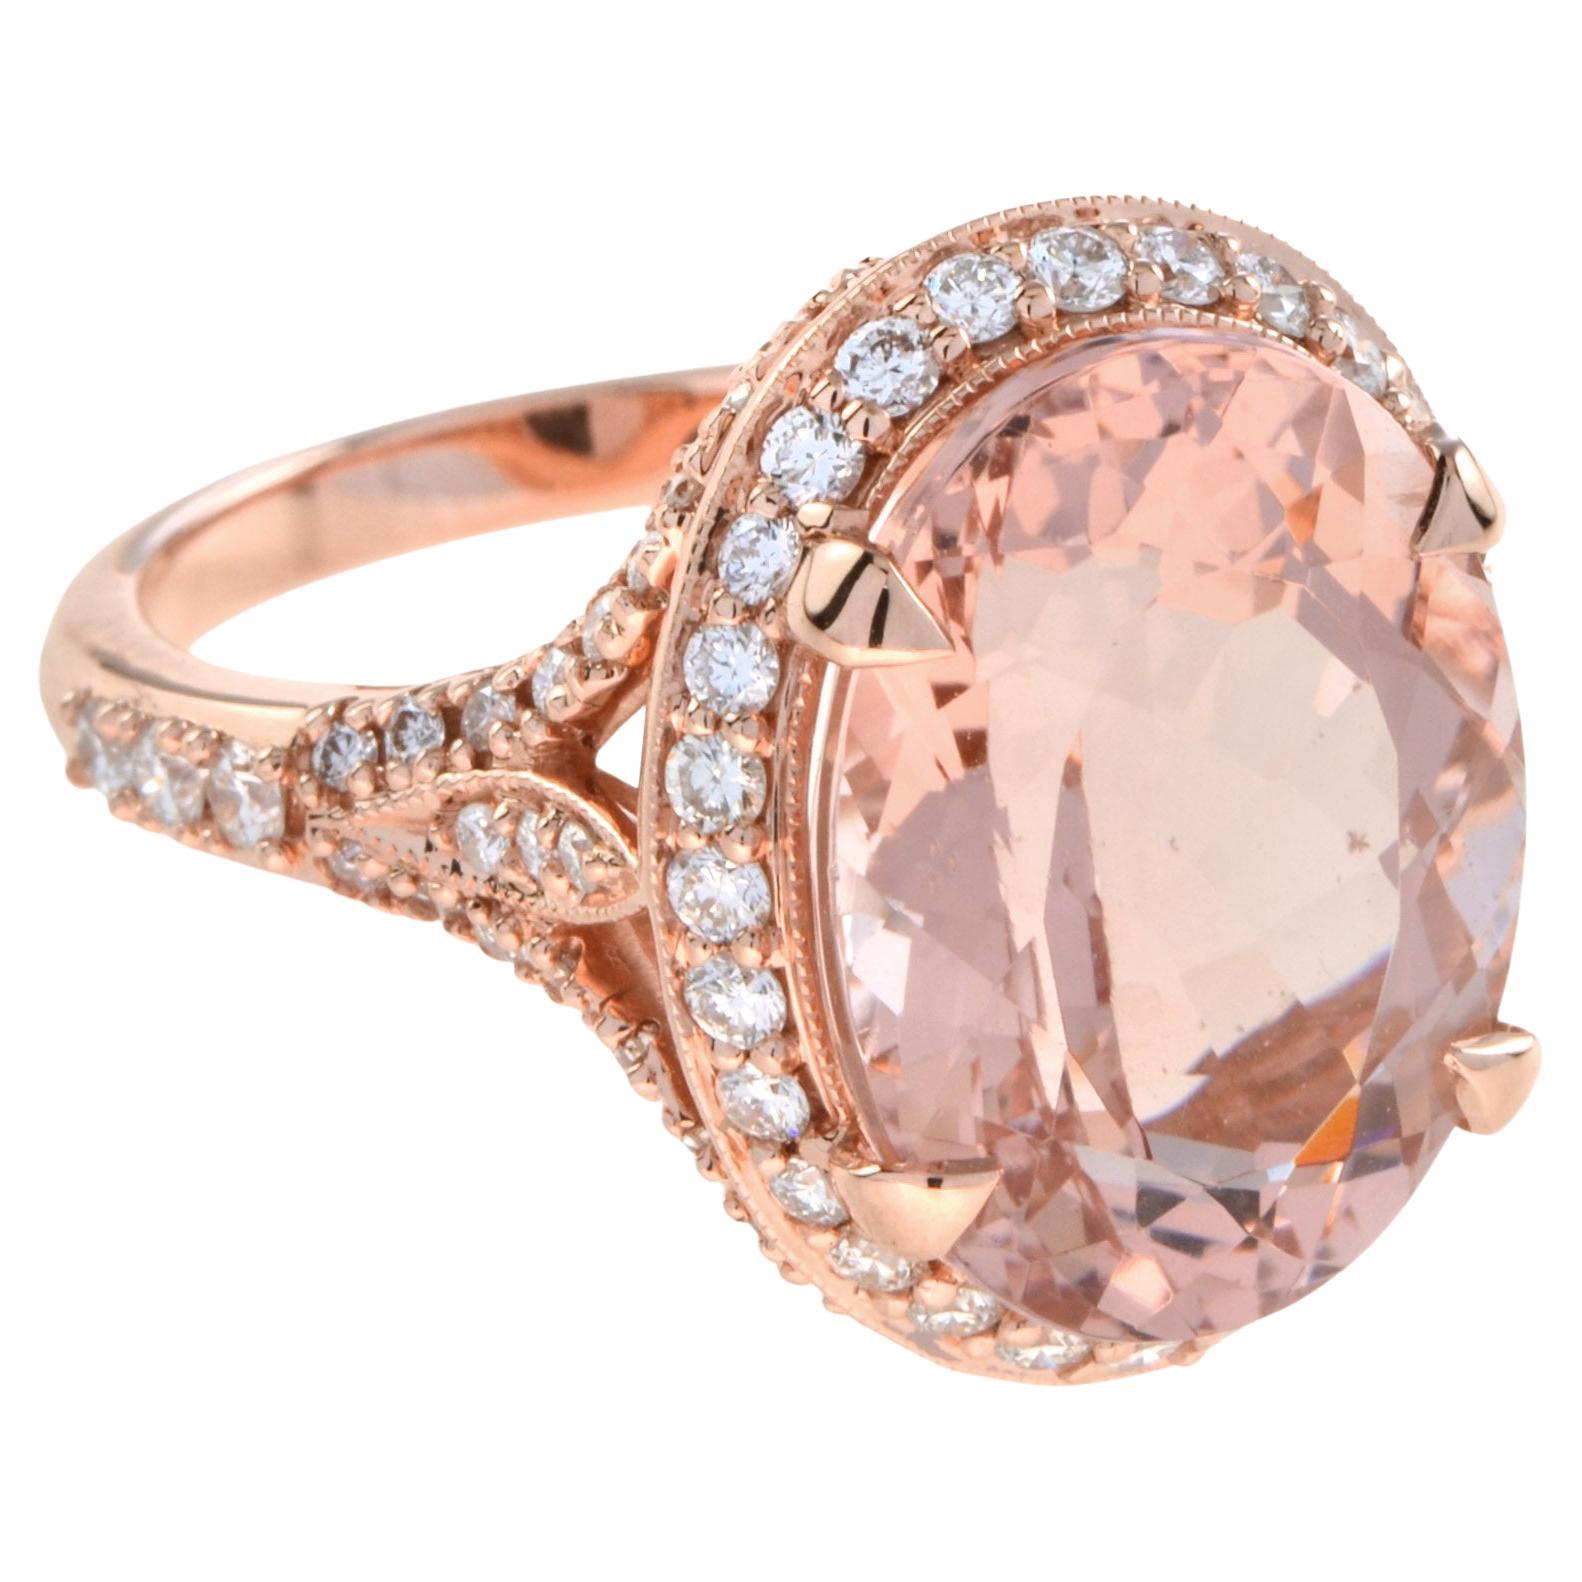 Halona 9.60 ct. Oval Morganite and Diamond Accent Cocktail Ring in 18K Rose Gold